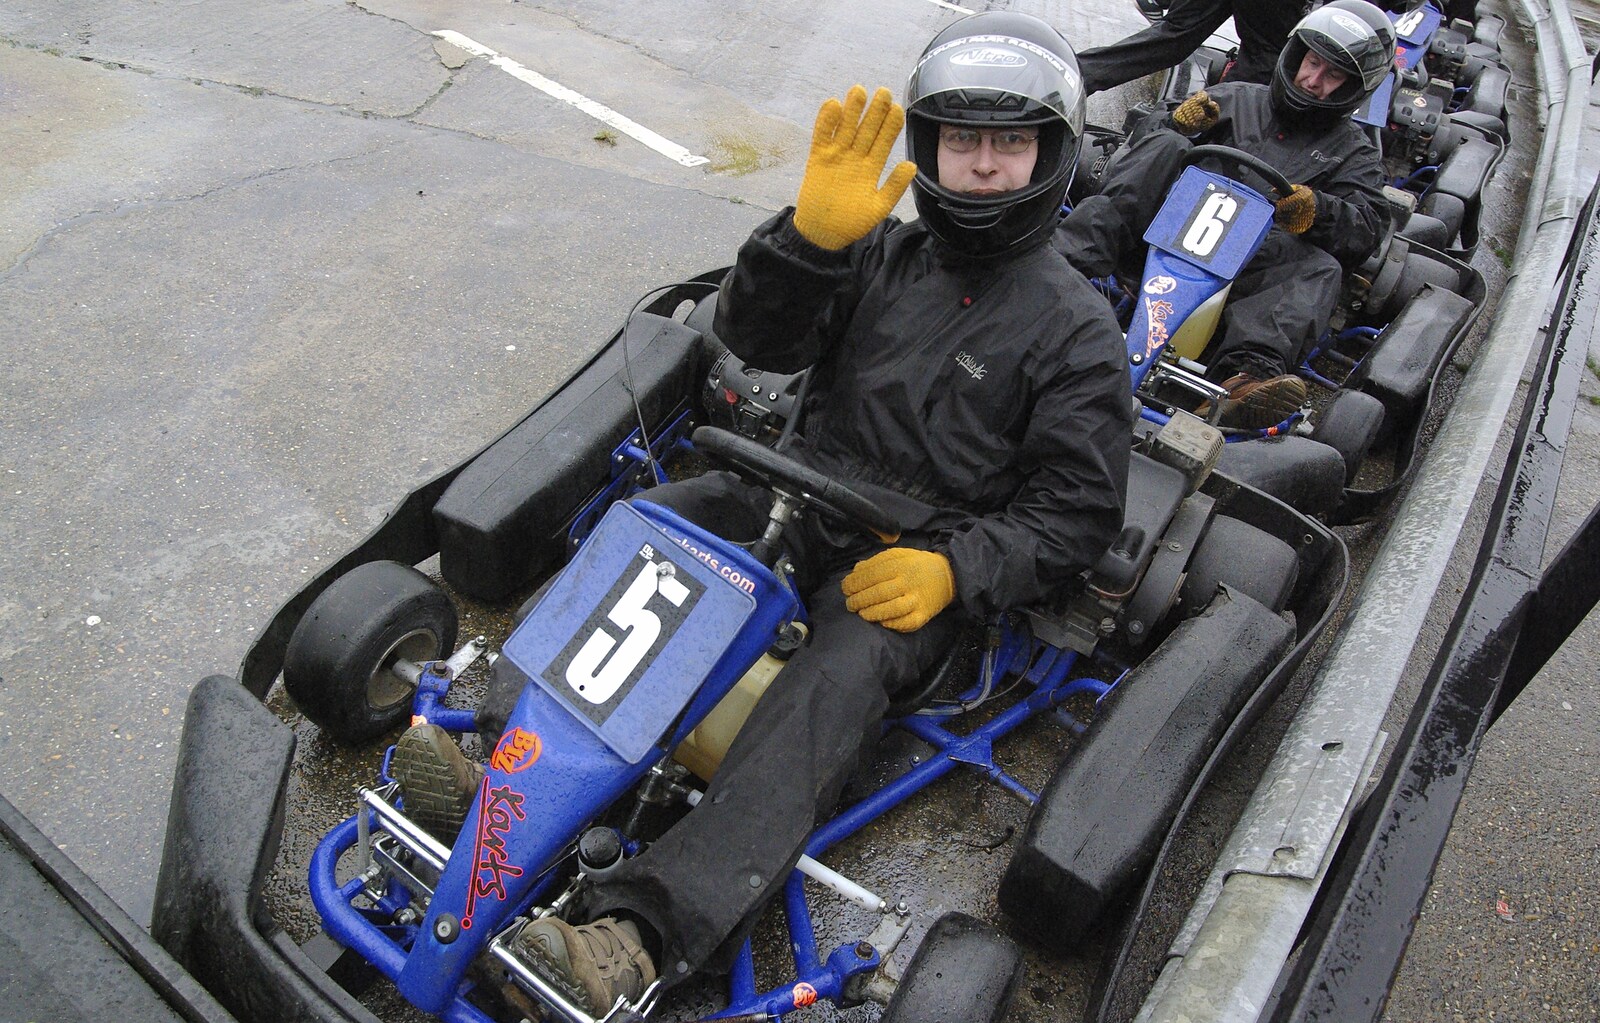 Gov's Stag-Day Karting, Ellough Airfield, Beccles, Suffolk - 19th January 2008: Marc waves